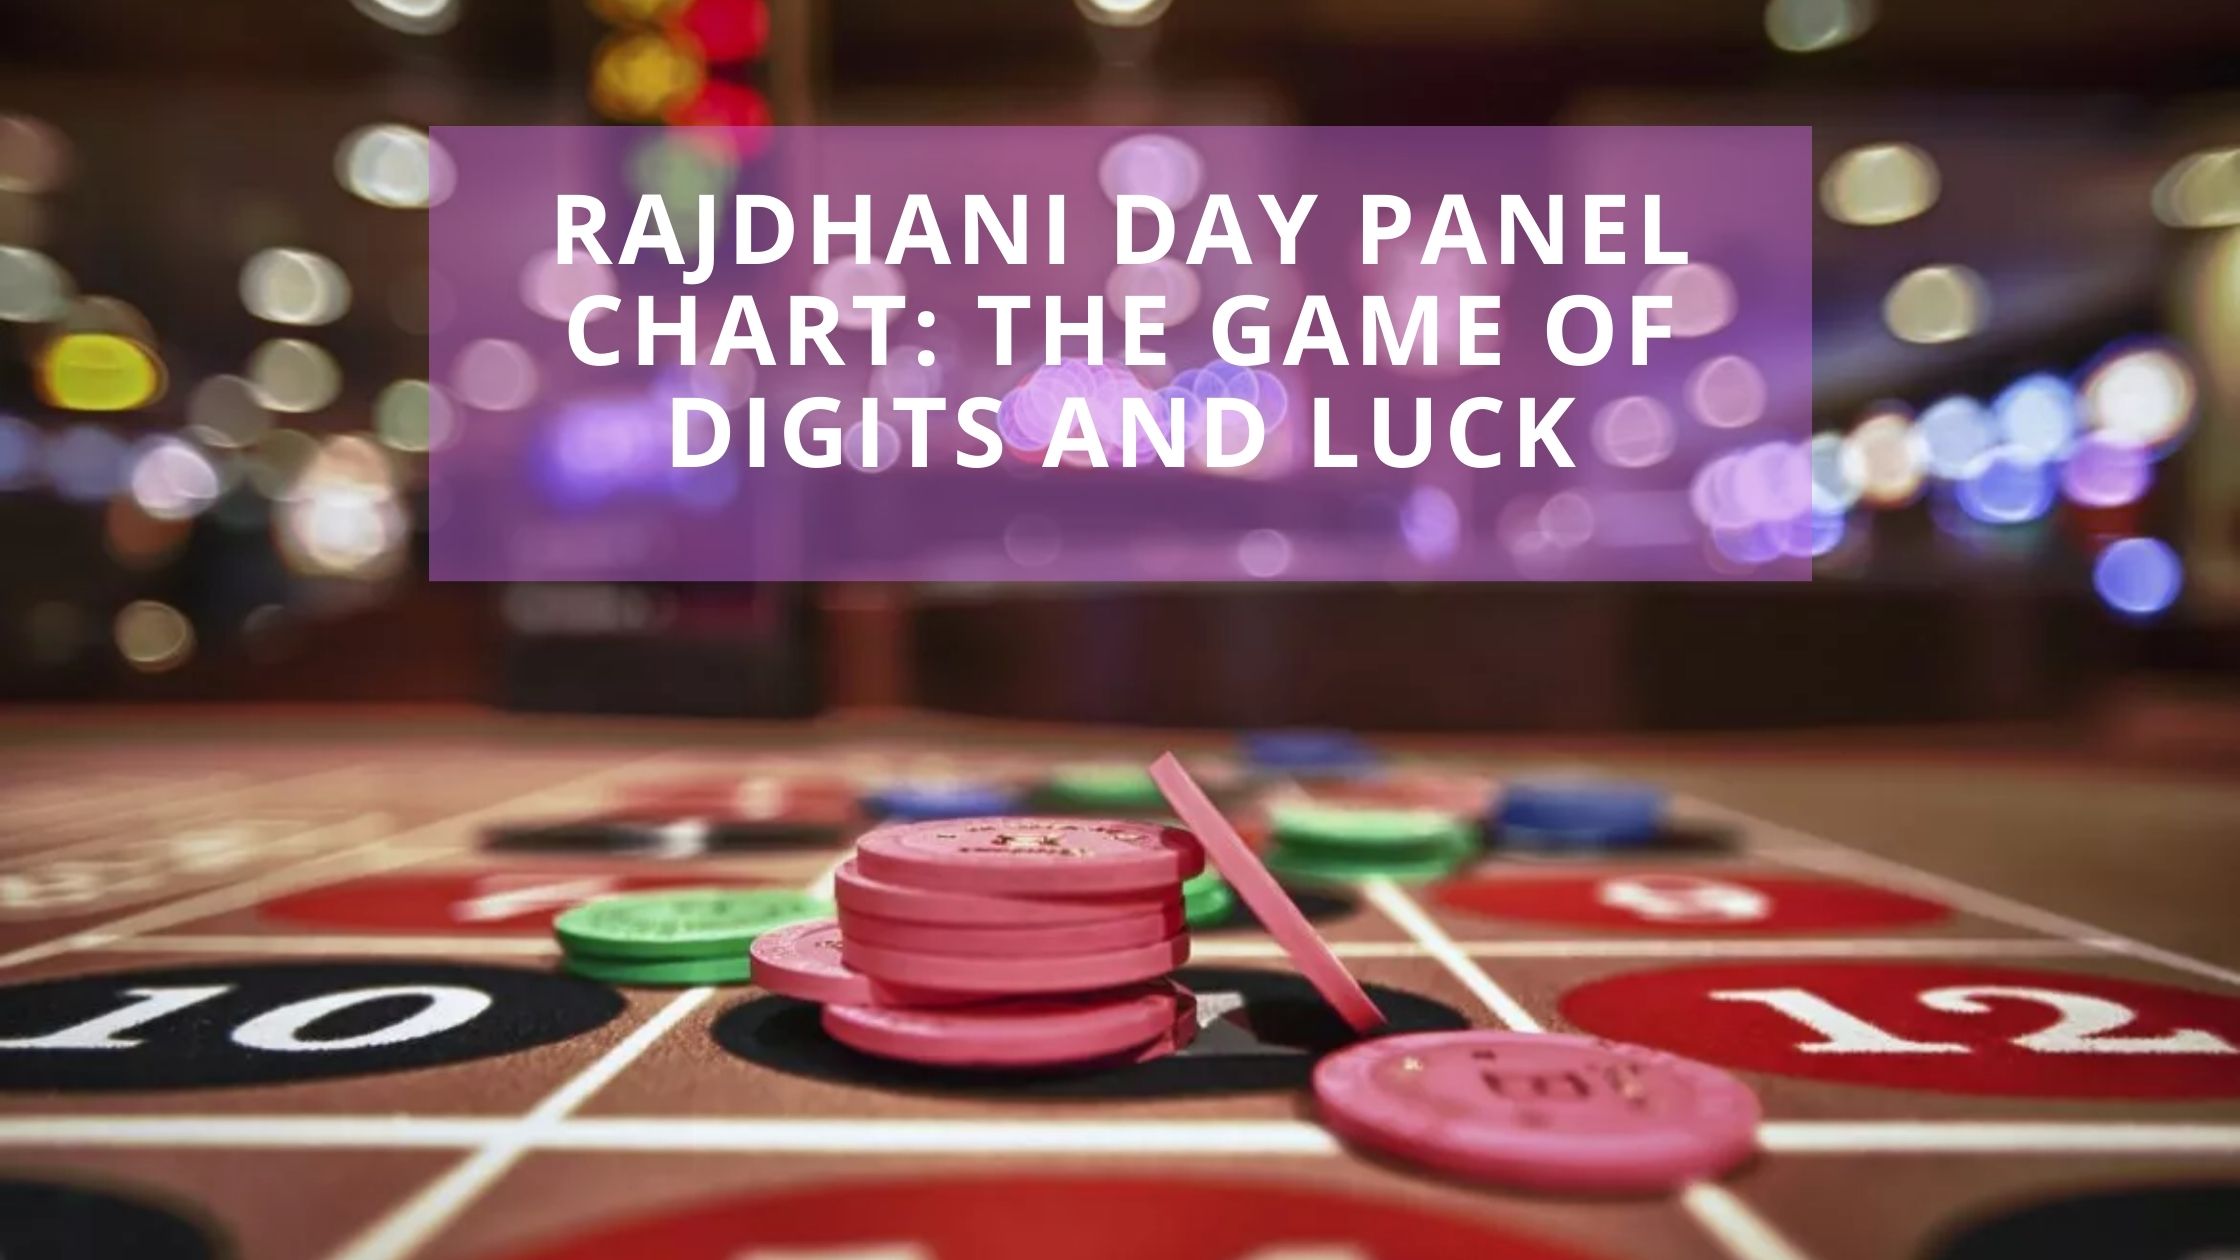 Rajdhani Day Panel Chart: The Game Of Digits And Luck